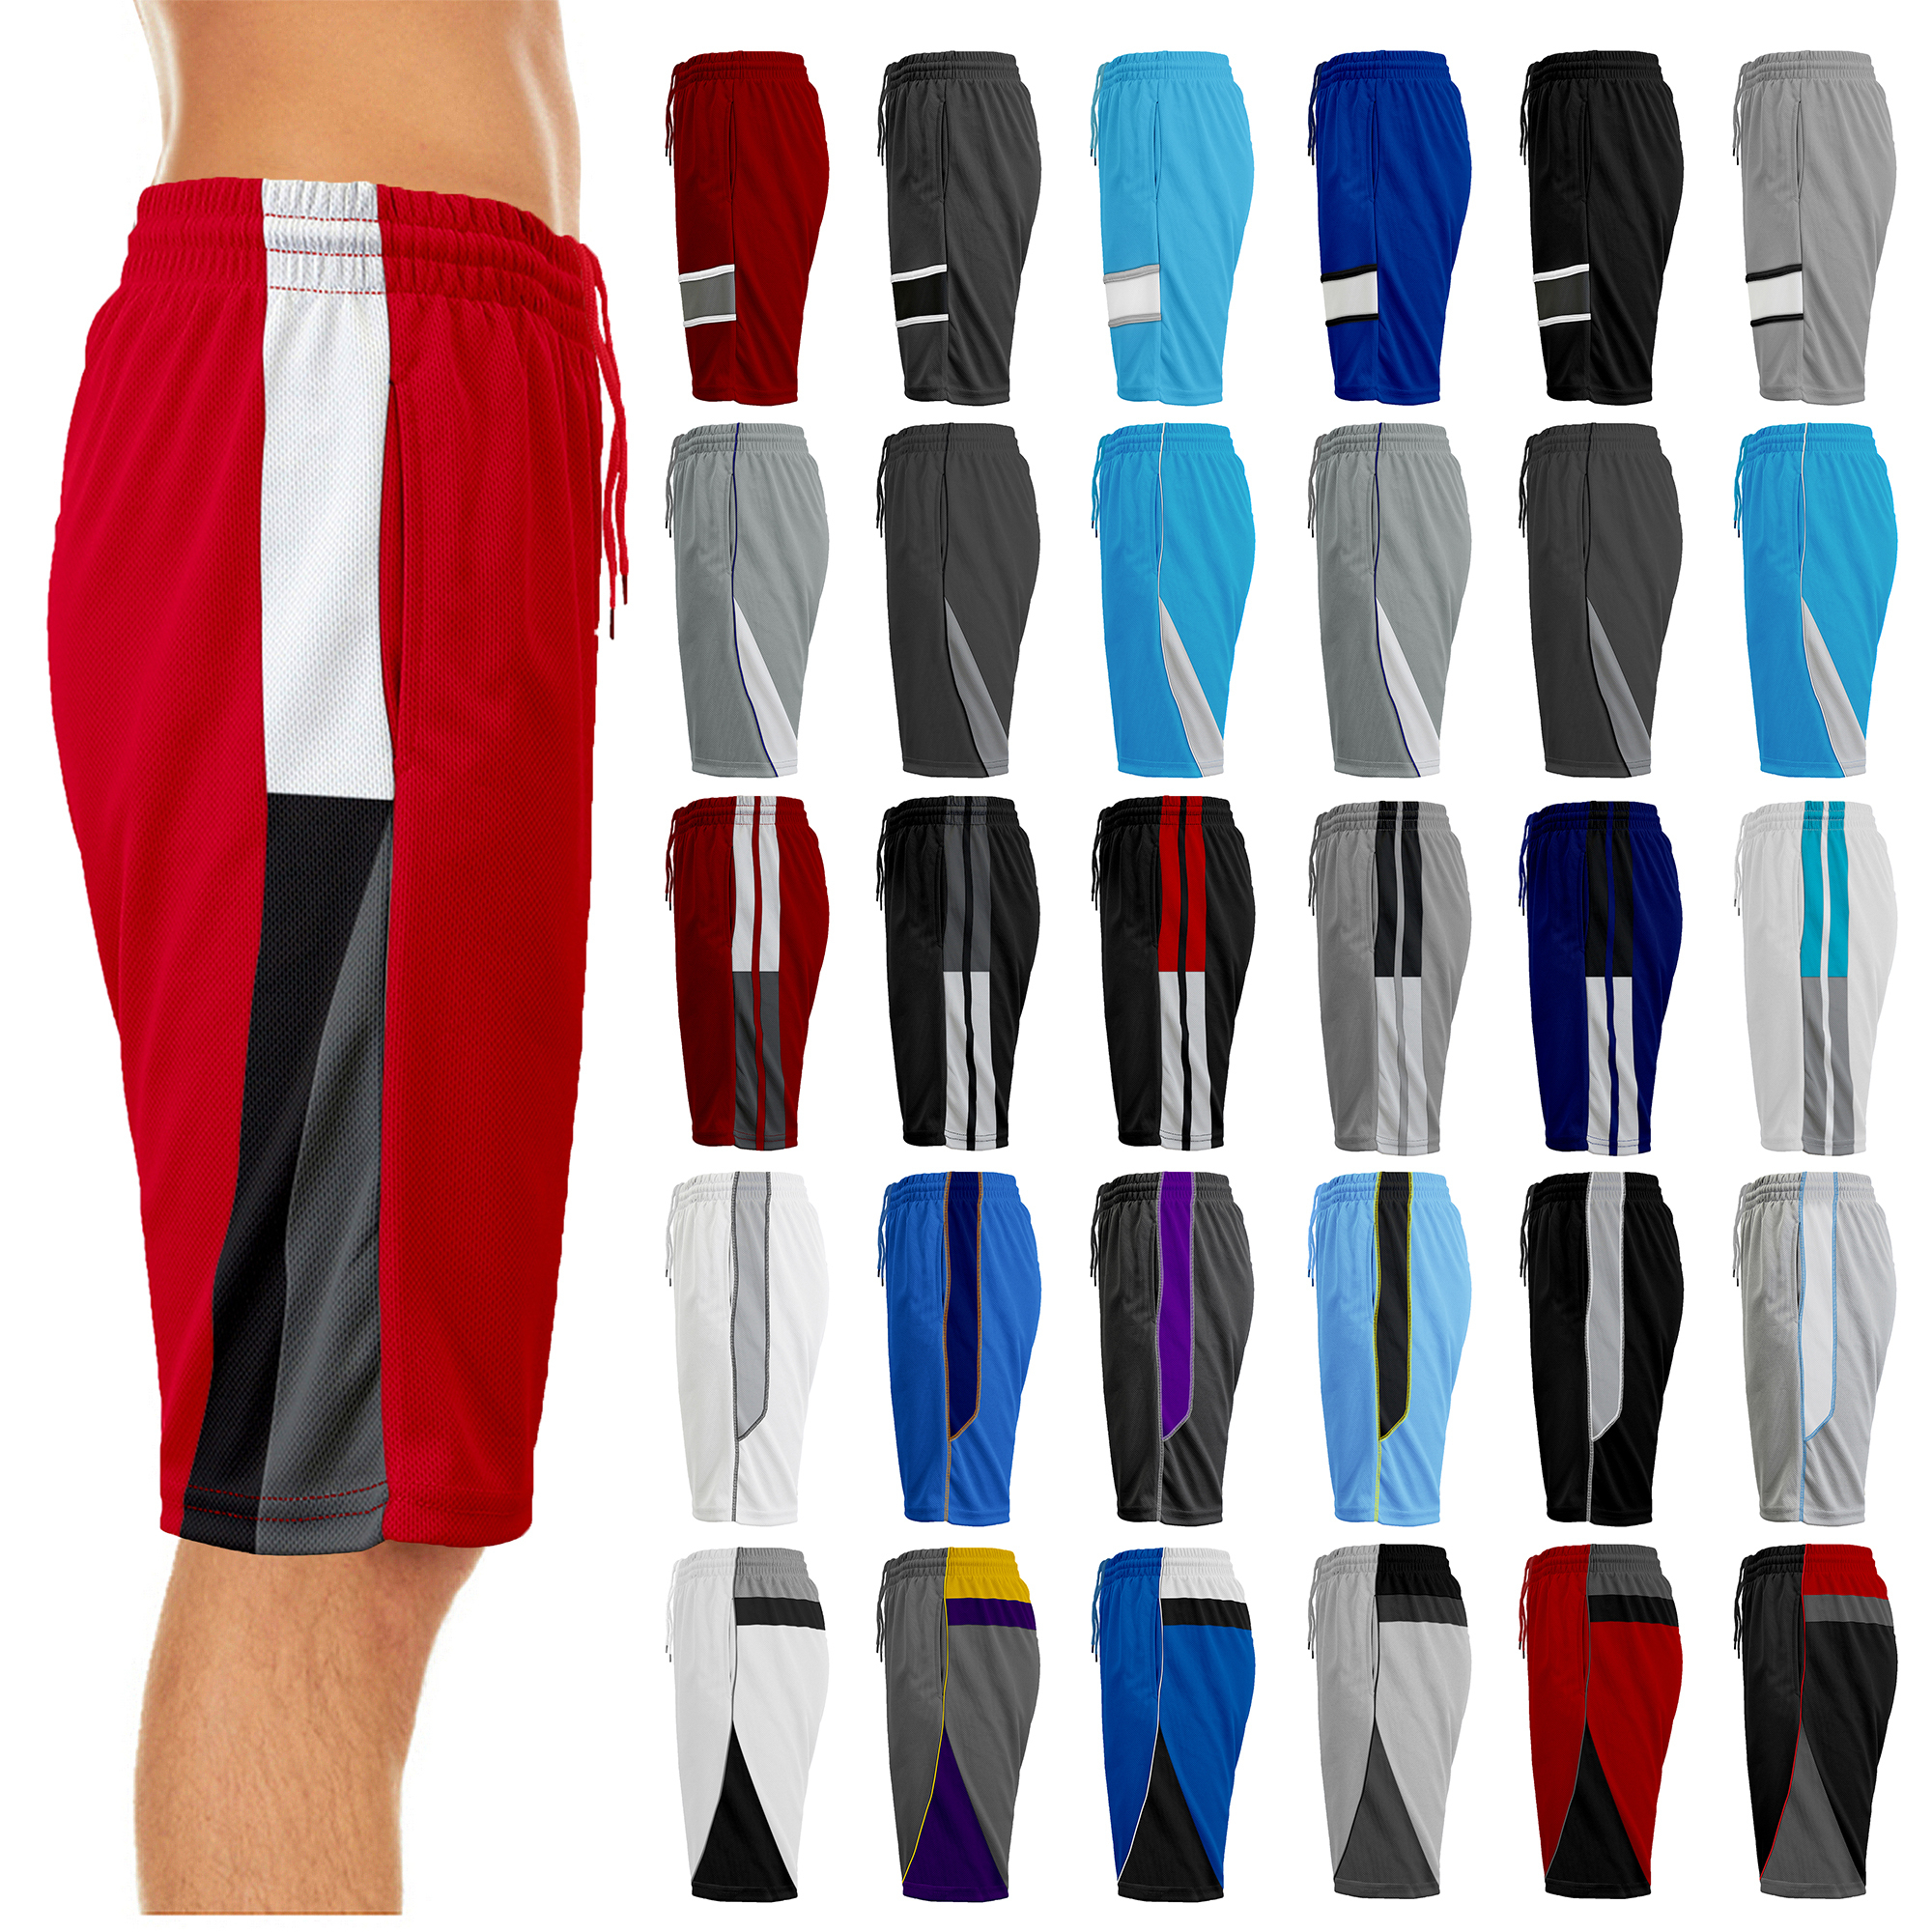 5-Pack: Men's Active Moisture-Wicking Mesh Performance Shorts (S-2XL) - Assorted, Large